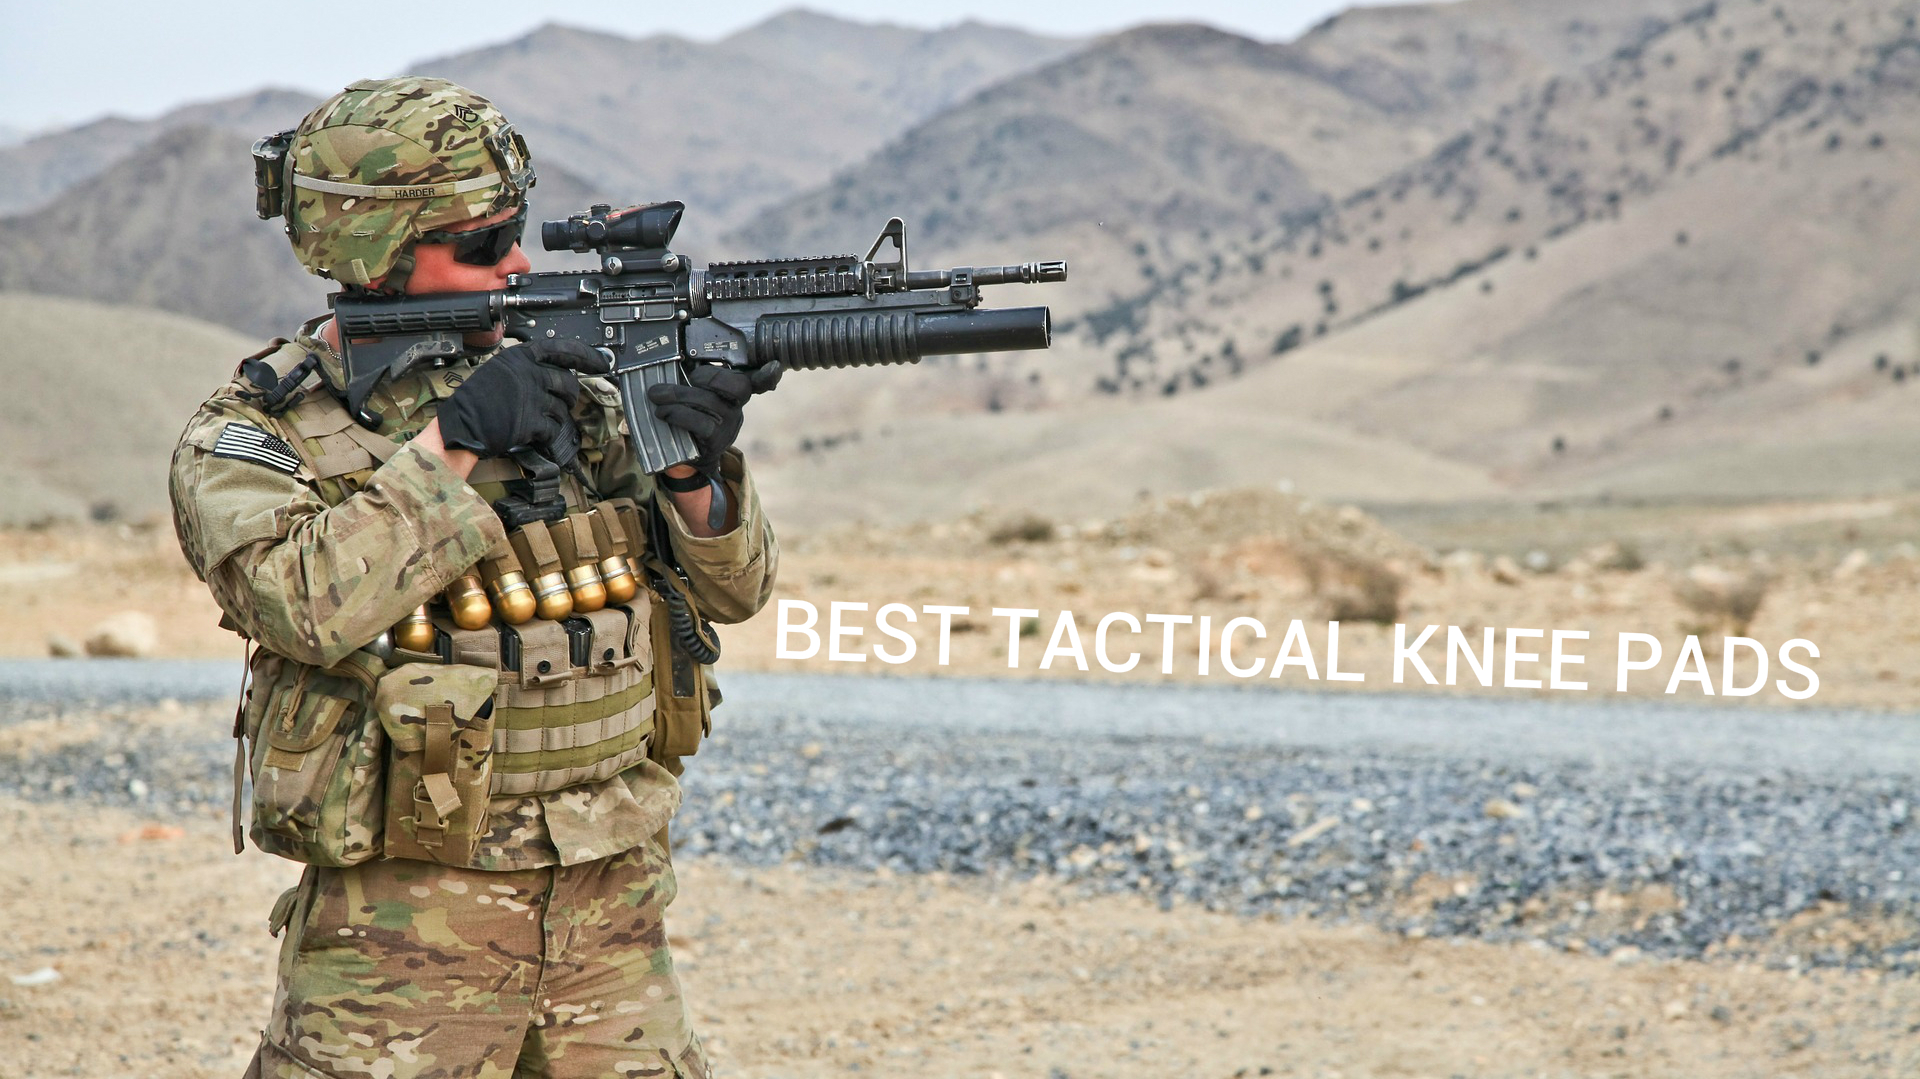 Best tactical knee pads for military and combat